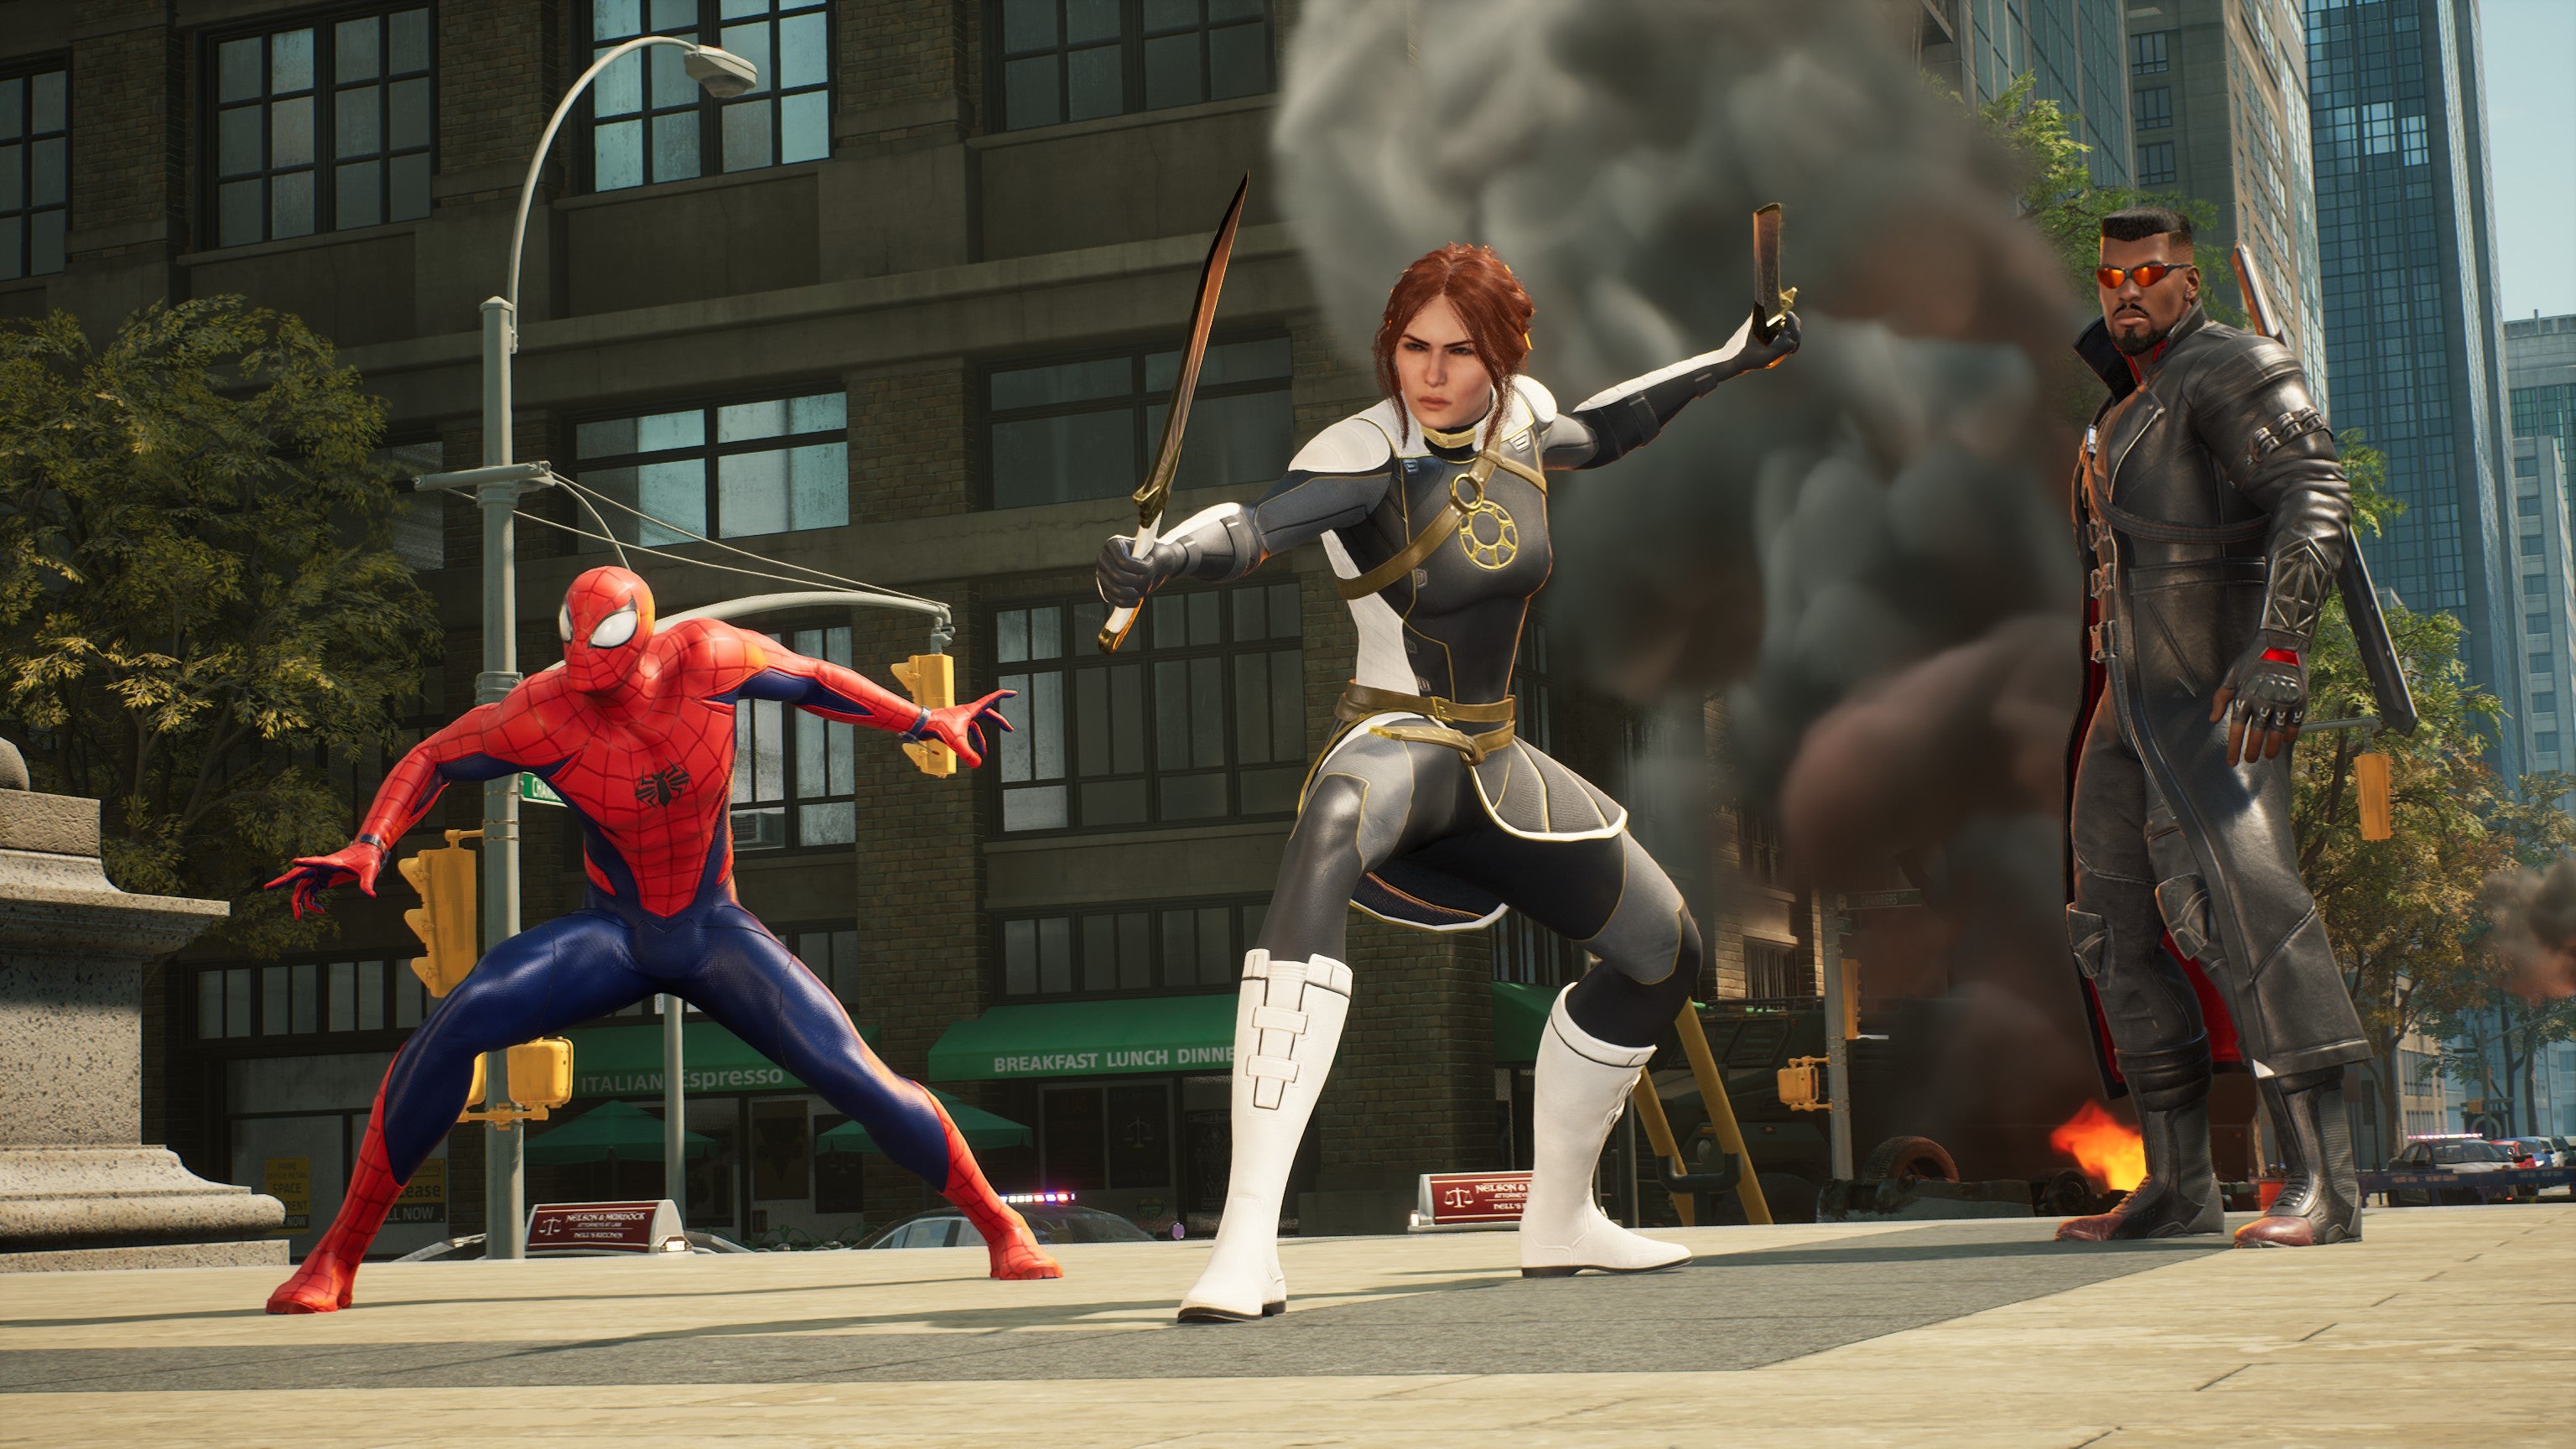 Spider-Man, The Hunter and Blade pose in New York in Marvel's Midnight Suns